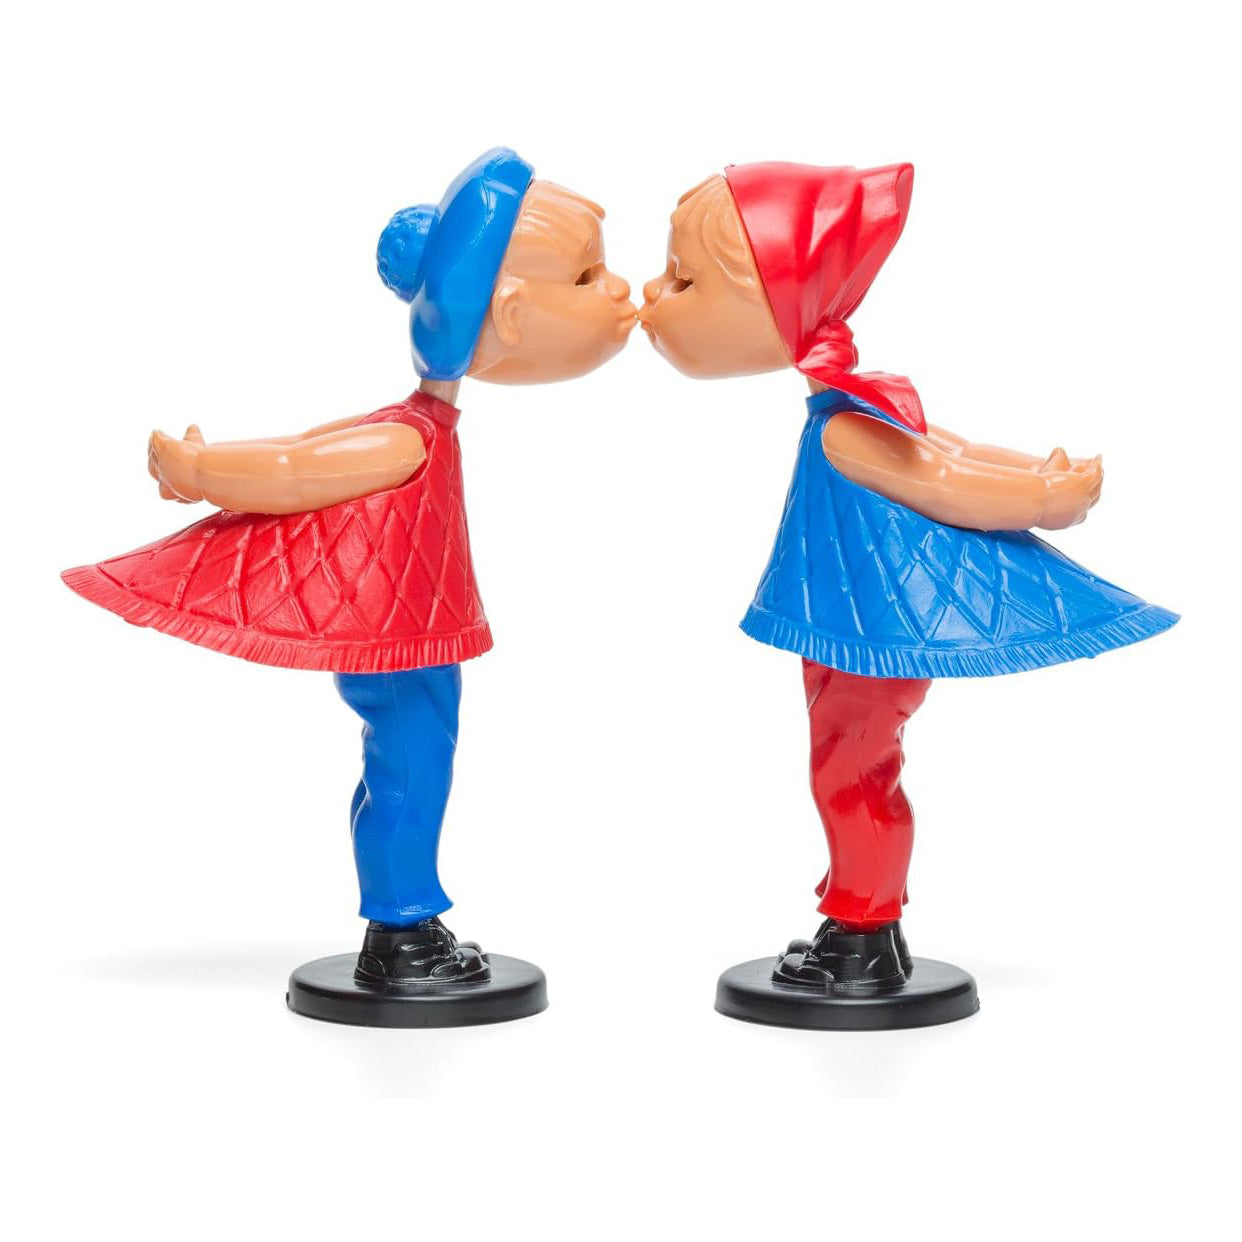 Magnetic Kiss Dolls (Available in 2 colors)